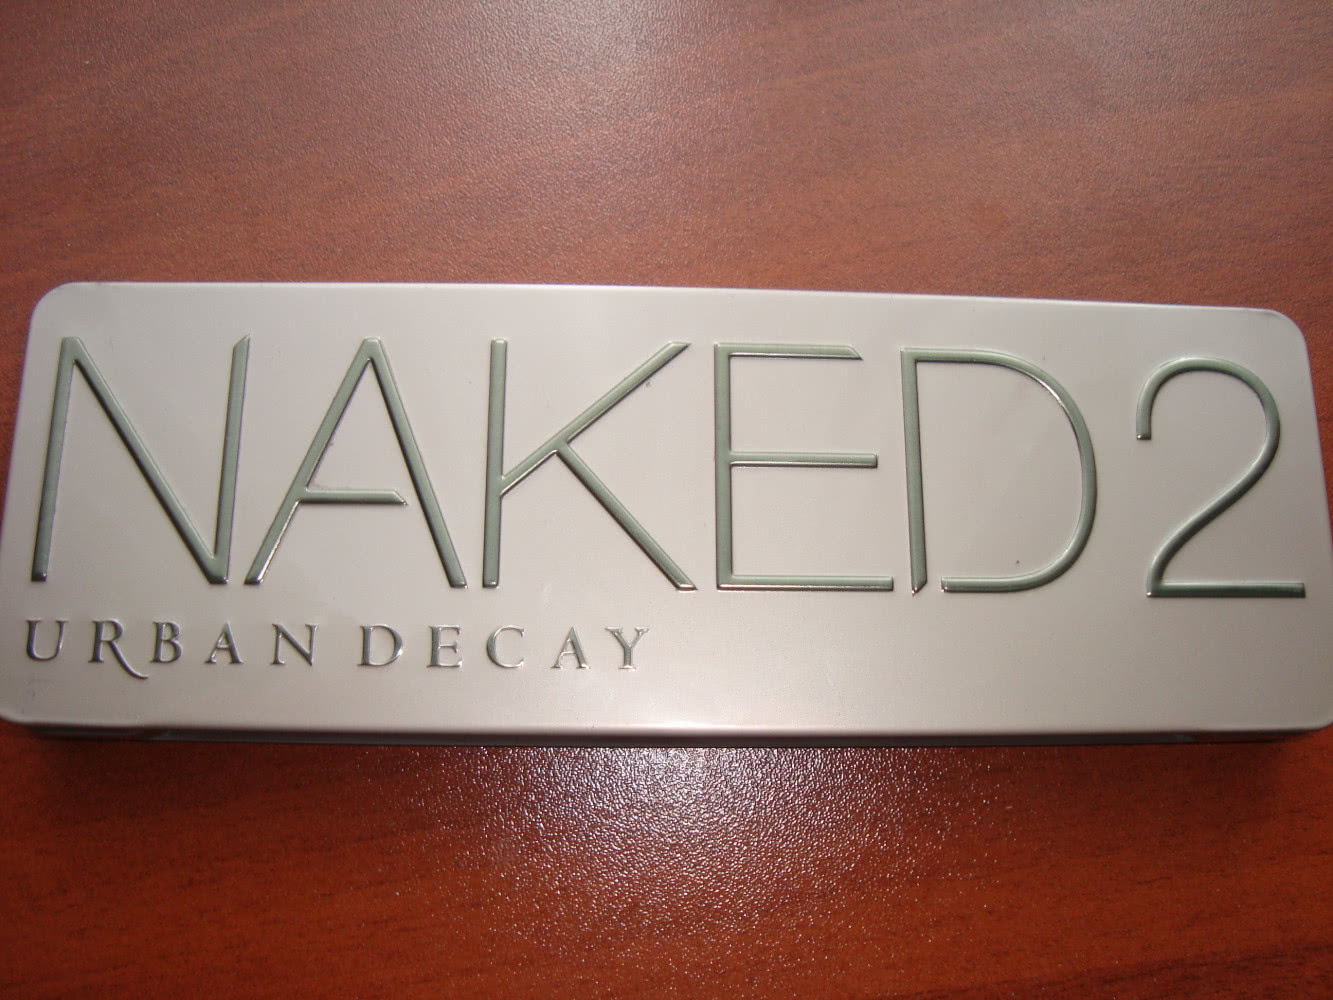 Naked2 Urban Decay